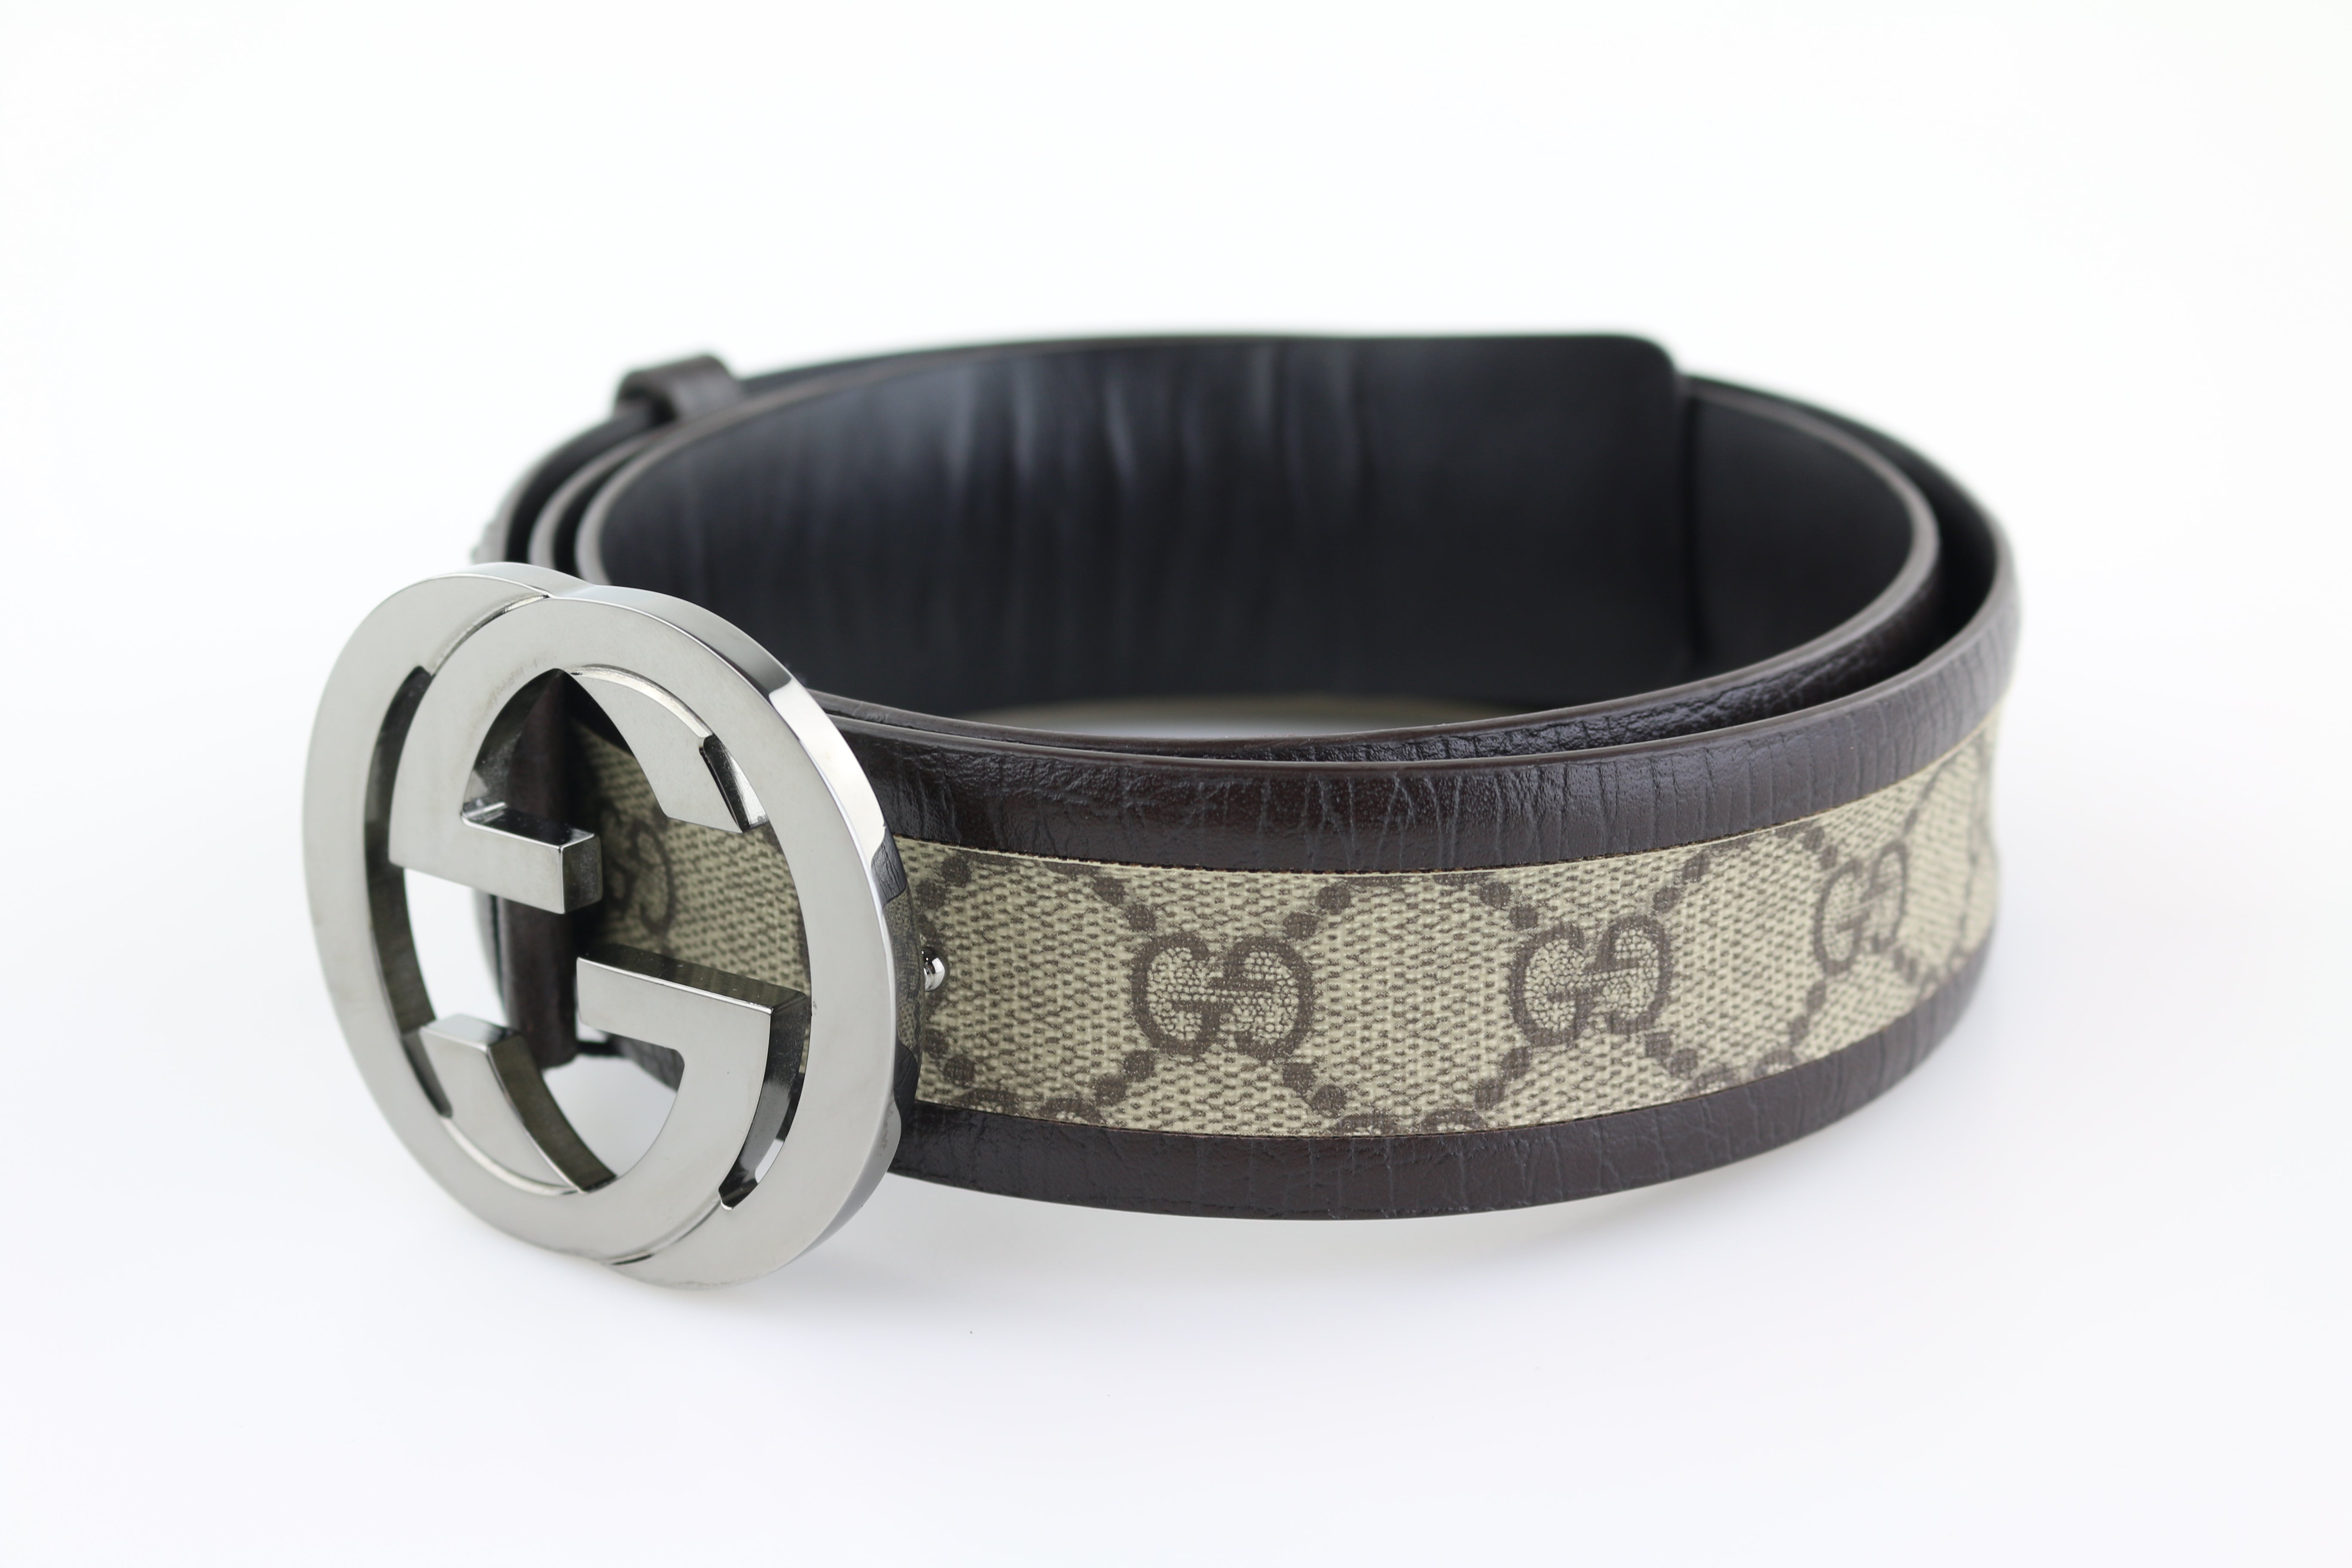 Gucci Pre-owned Women's Synthetic Fibers Belt